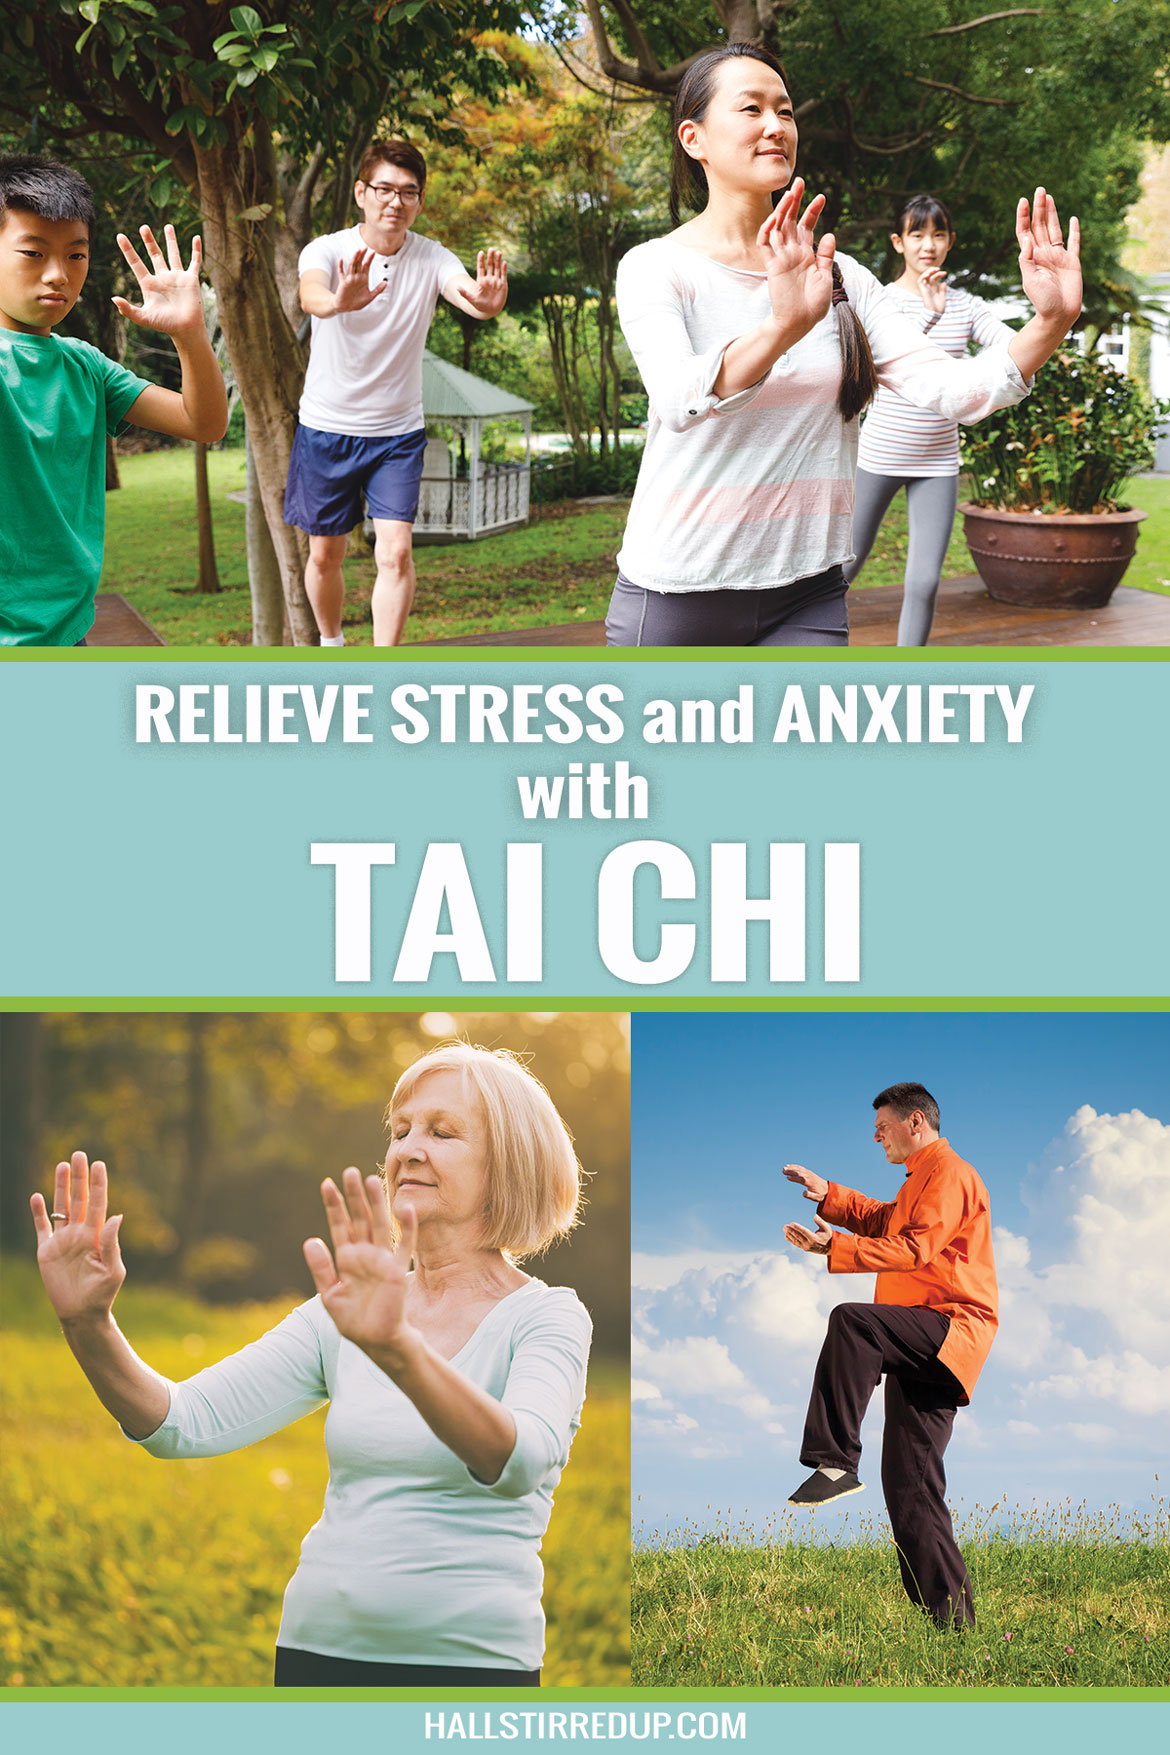 Relieve stress and anxiety with Tai Chi